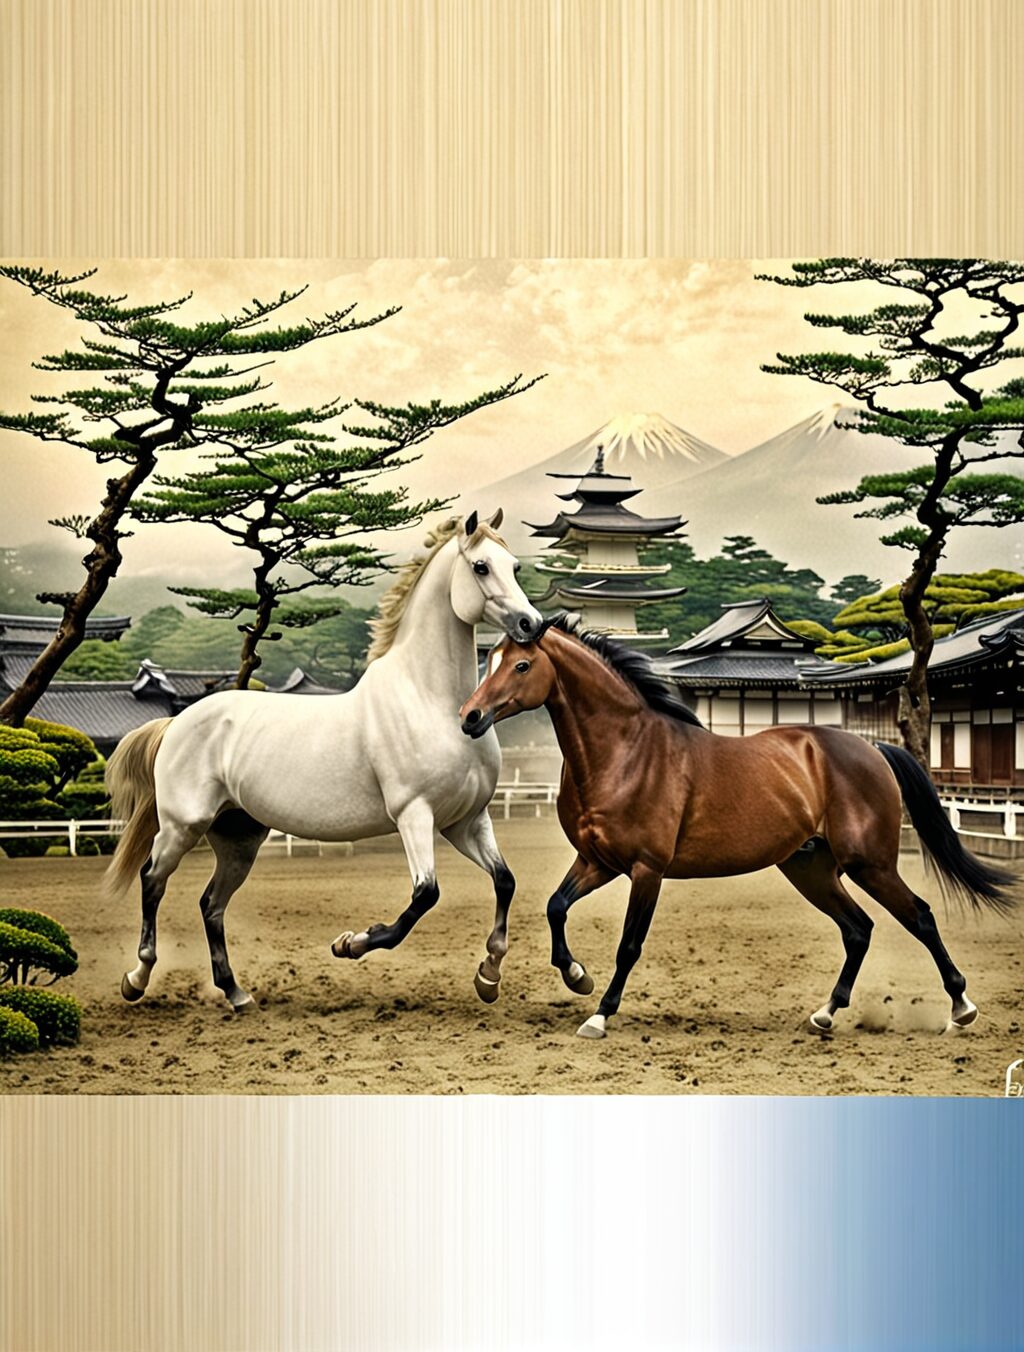 when did japanese get horses